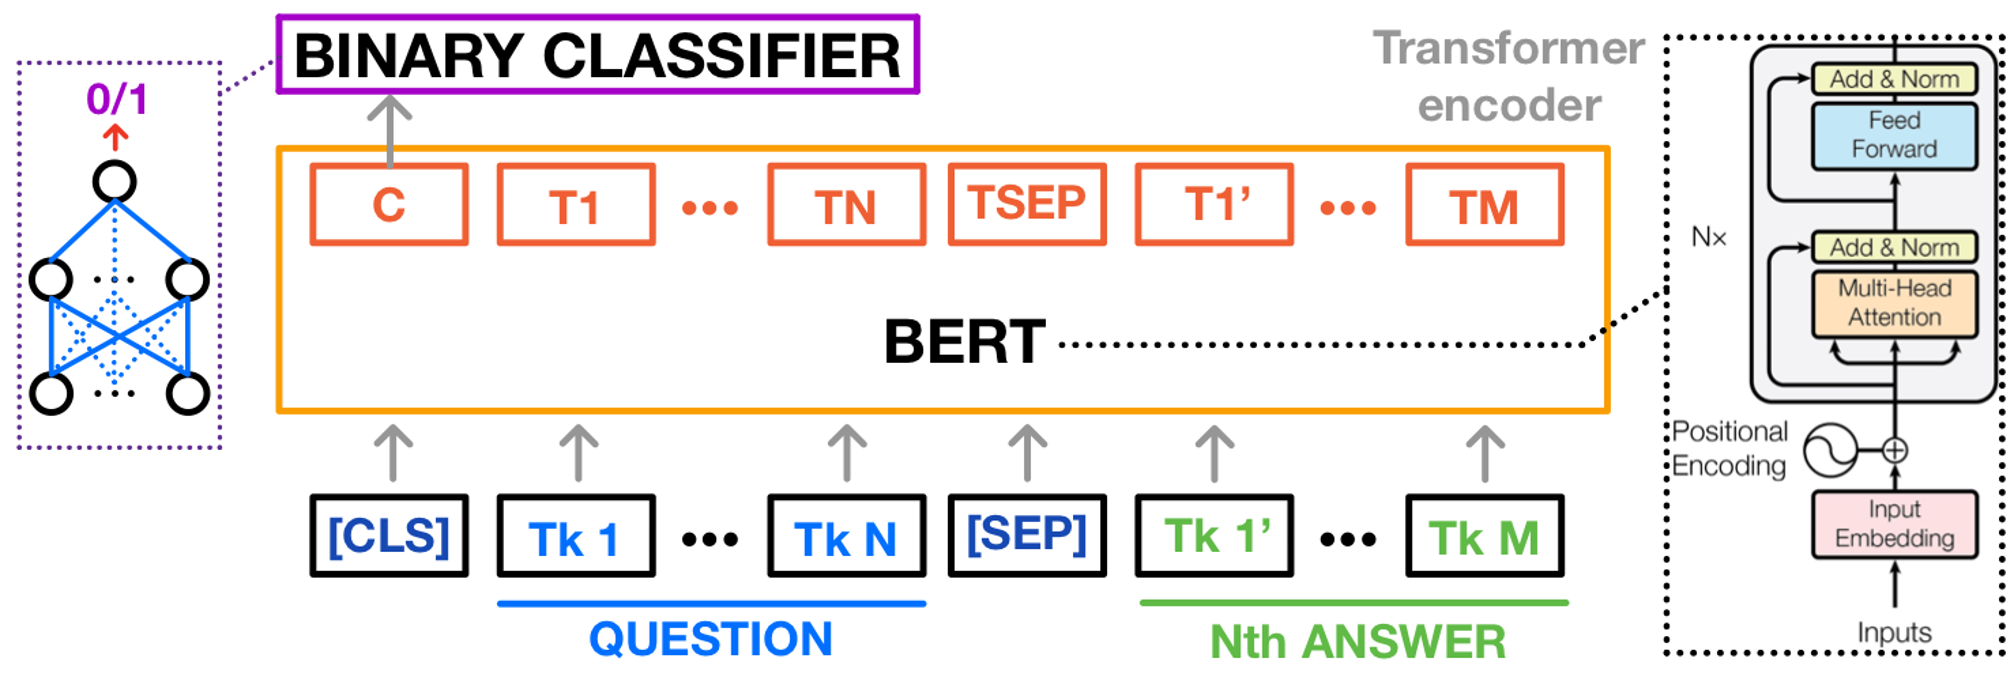 At the top, a binary classifier receives input from the [CLS] token of a BERT model. The BERT model processes input sequences including a classification token [CLS], question tokens, a separator token [SEP], and answer tokens. The BERT model consists of a transformer encoder, depicted as layers of multi-head attention and feed-forward neural networks with positional encoding. An inset on the right illustrates the internal structure of the transformer encoder.